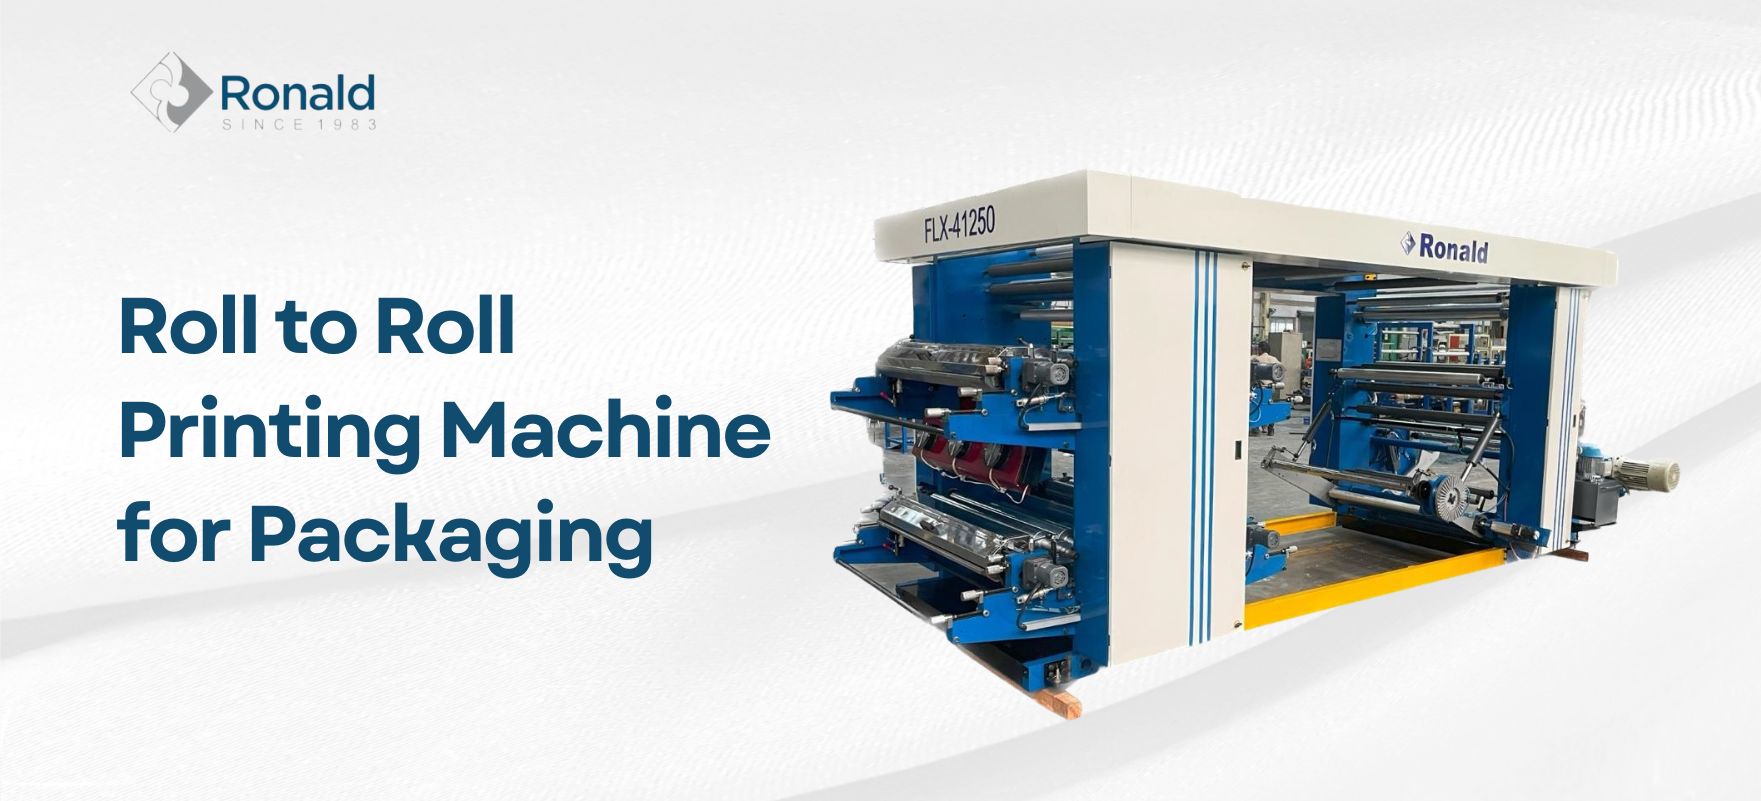 Roll to Roll Printing Machine for Packaging